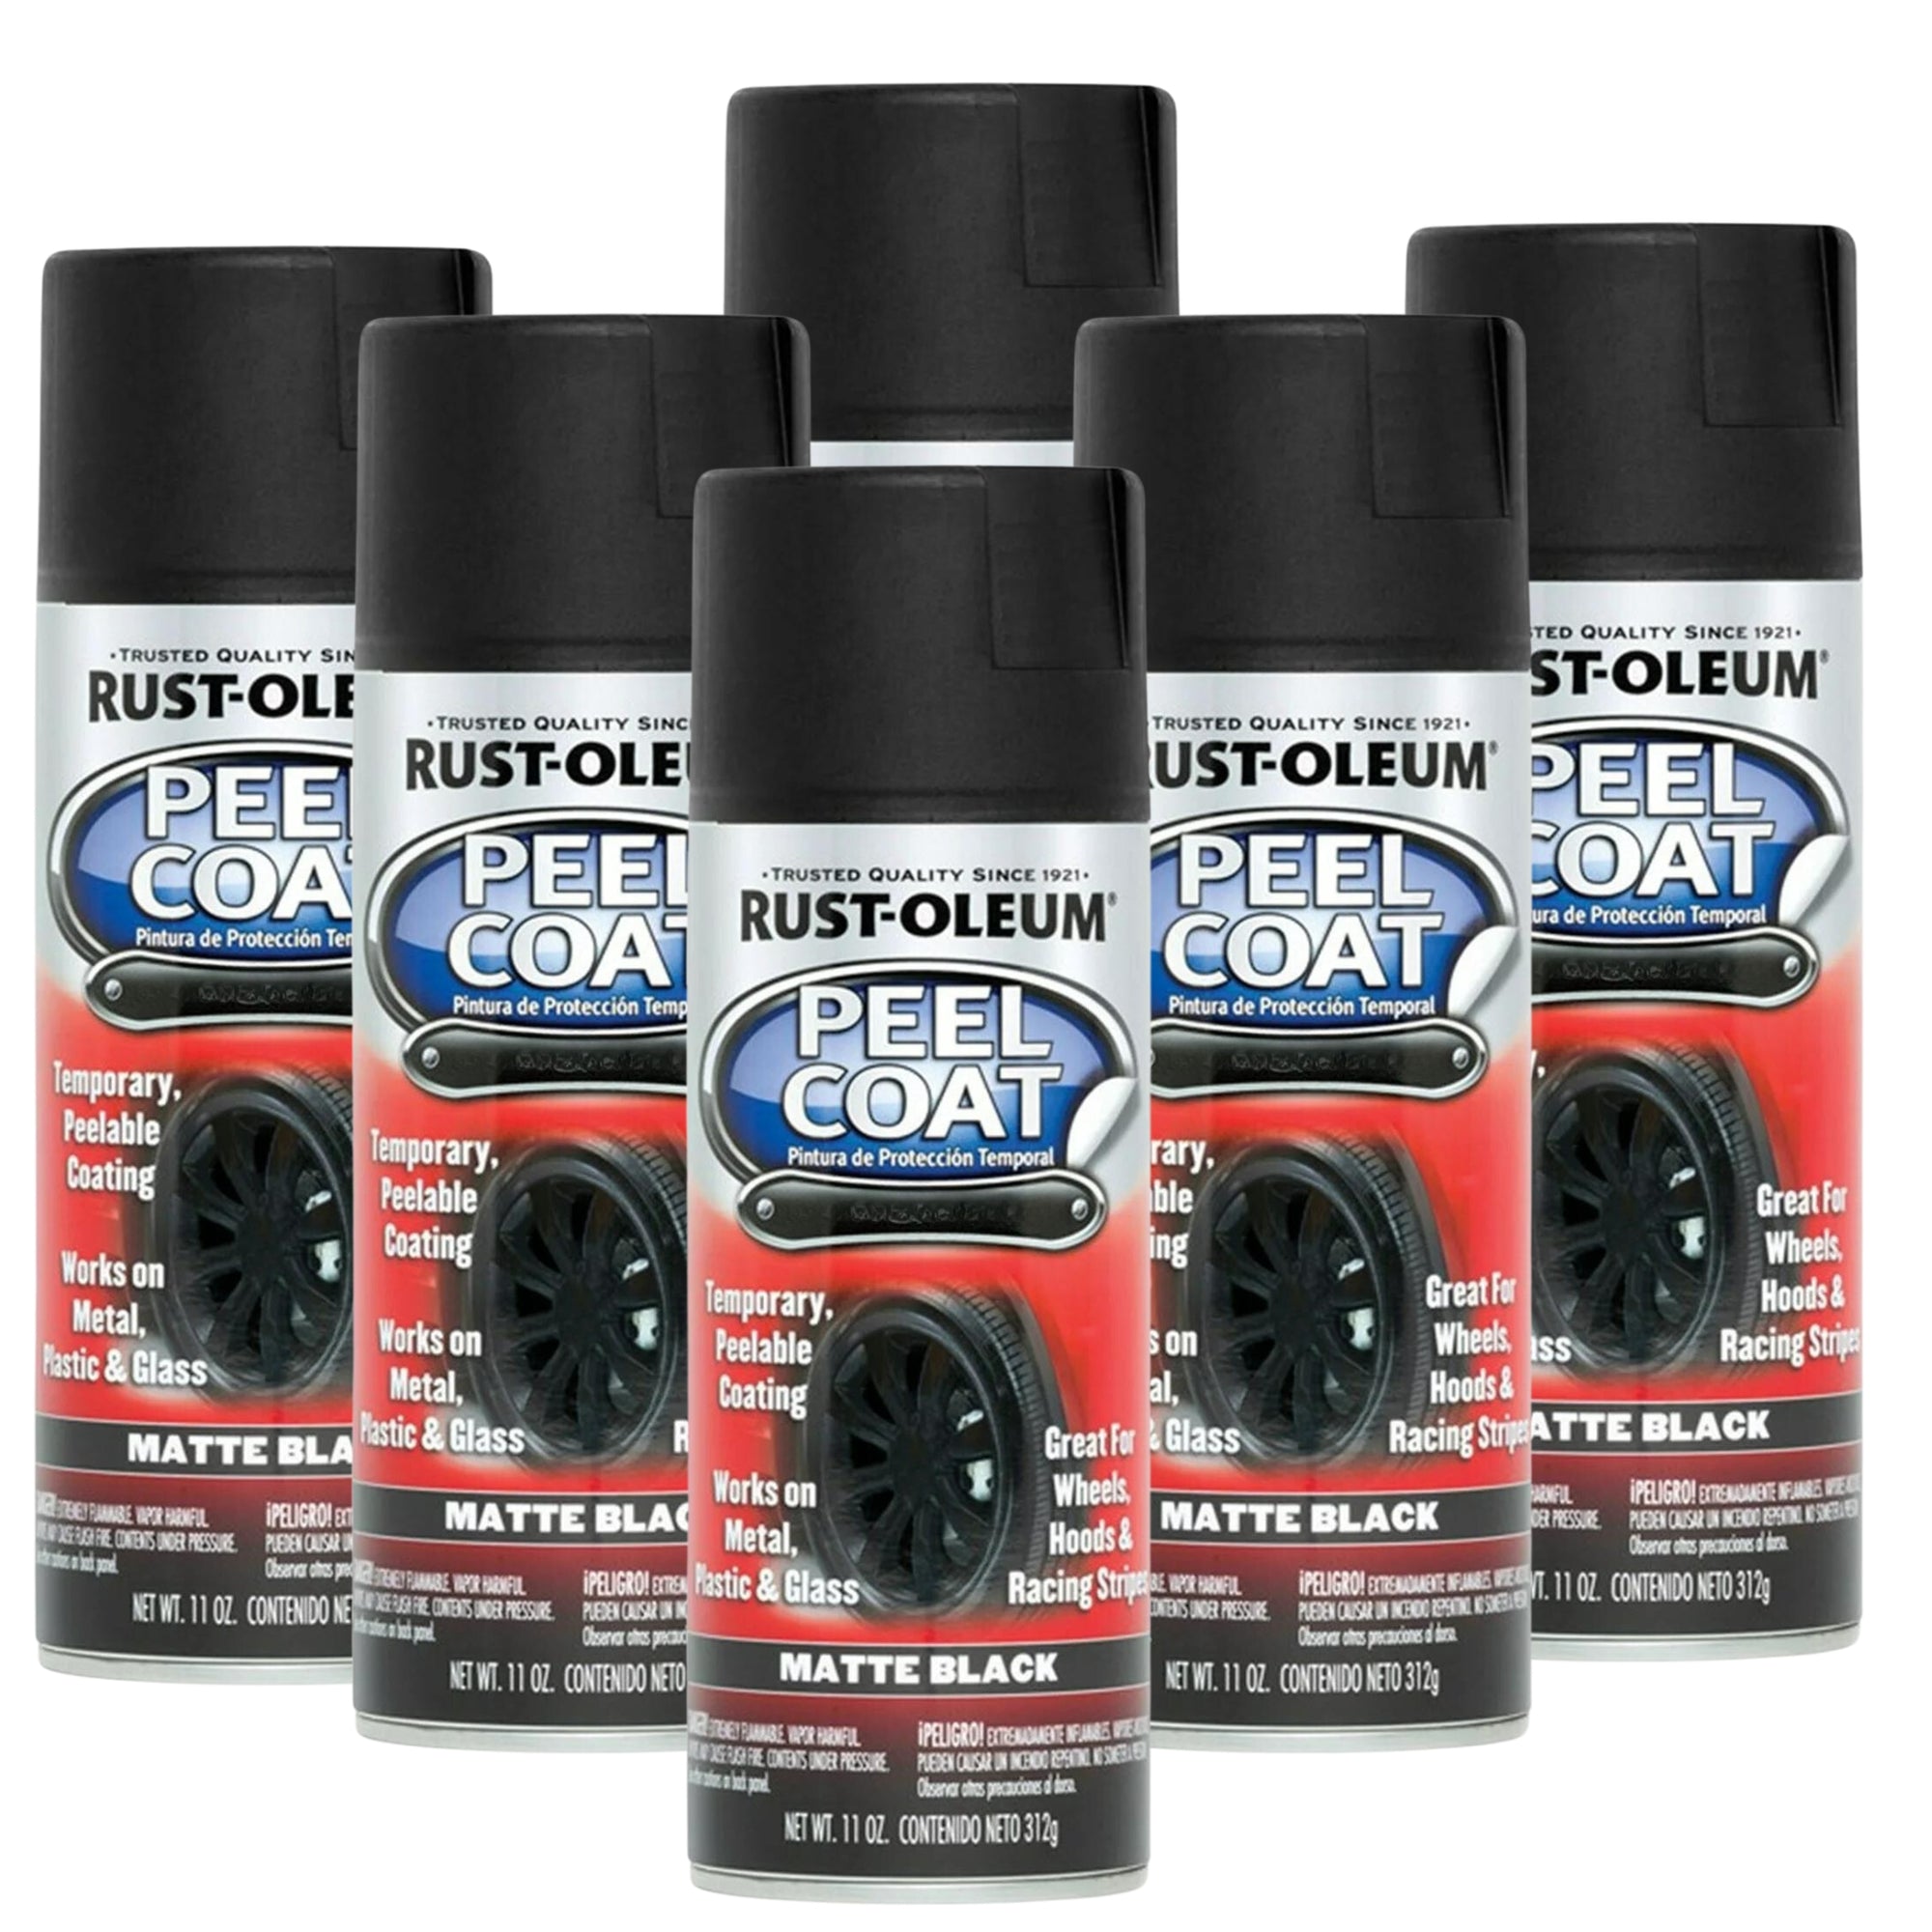 Rust-Oleum Peel Coat Spray Paint Removeable Rubber Coating, Matt Black (6 cans) - South East Clearance Centre